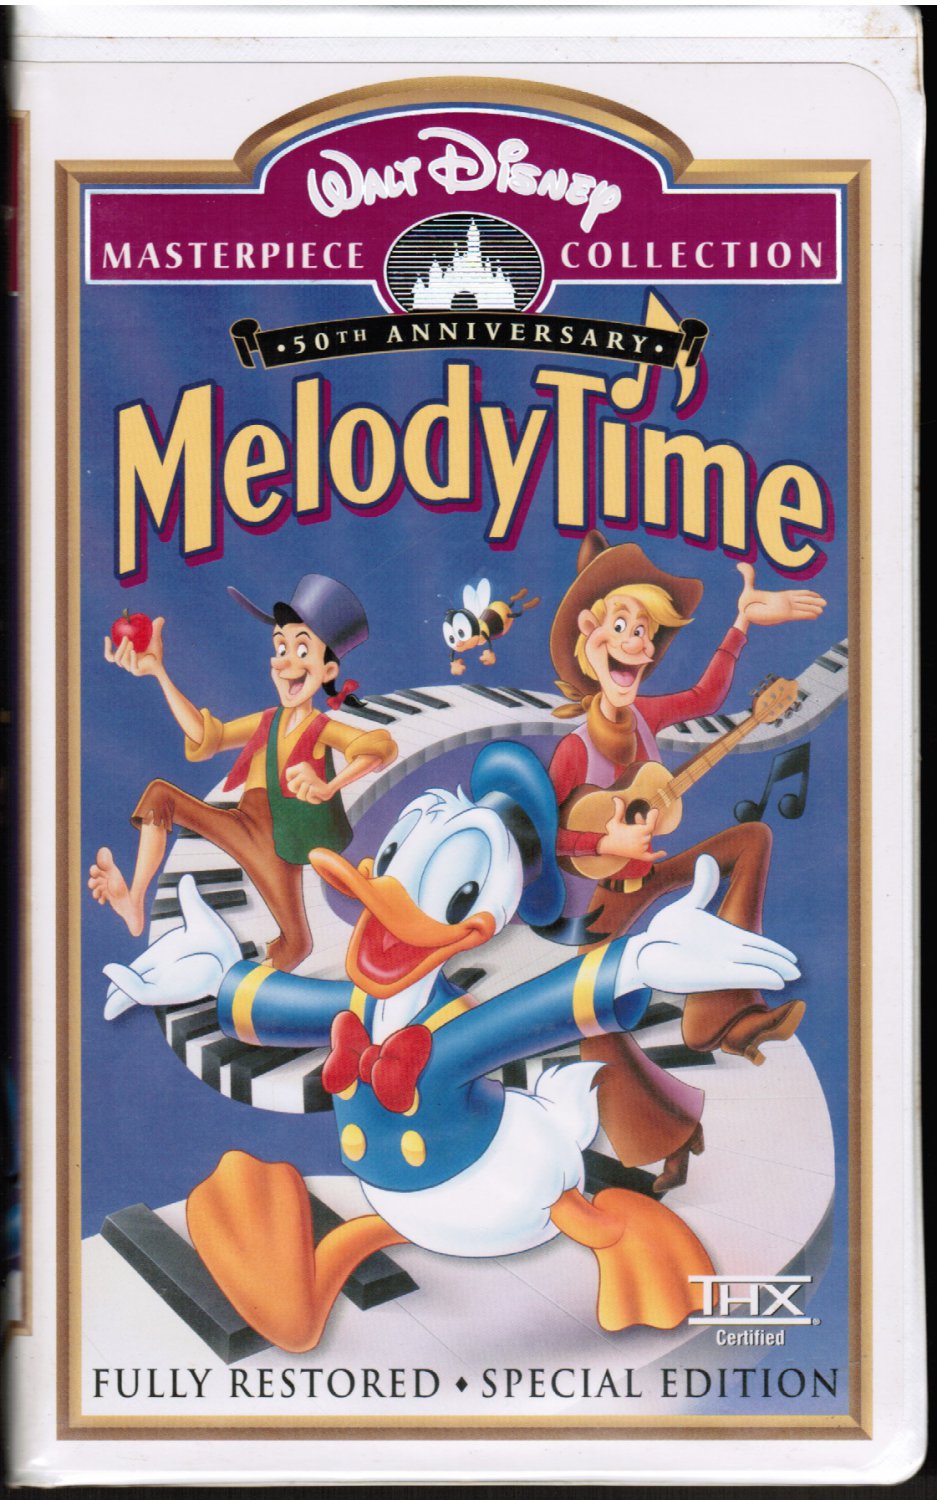 Melody Time Disney VHS 50th Anniversary Masterpiece Edition